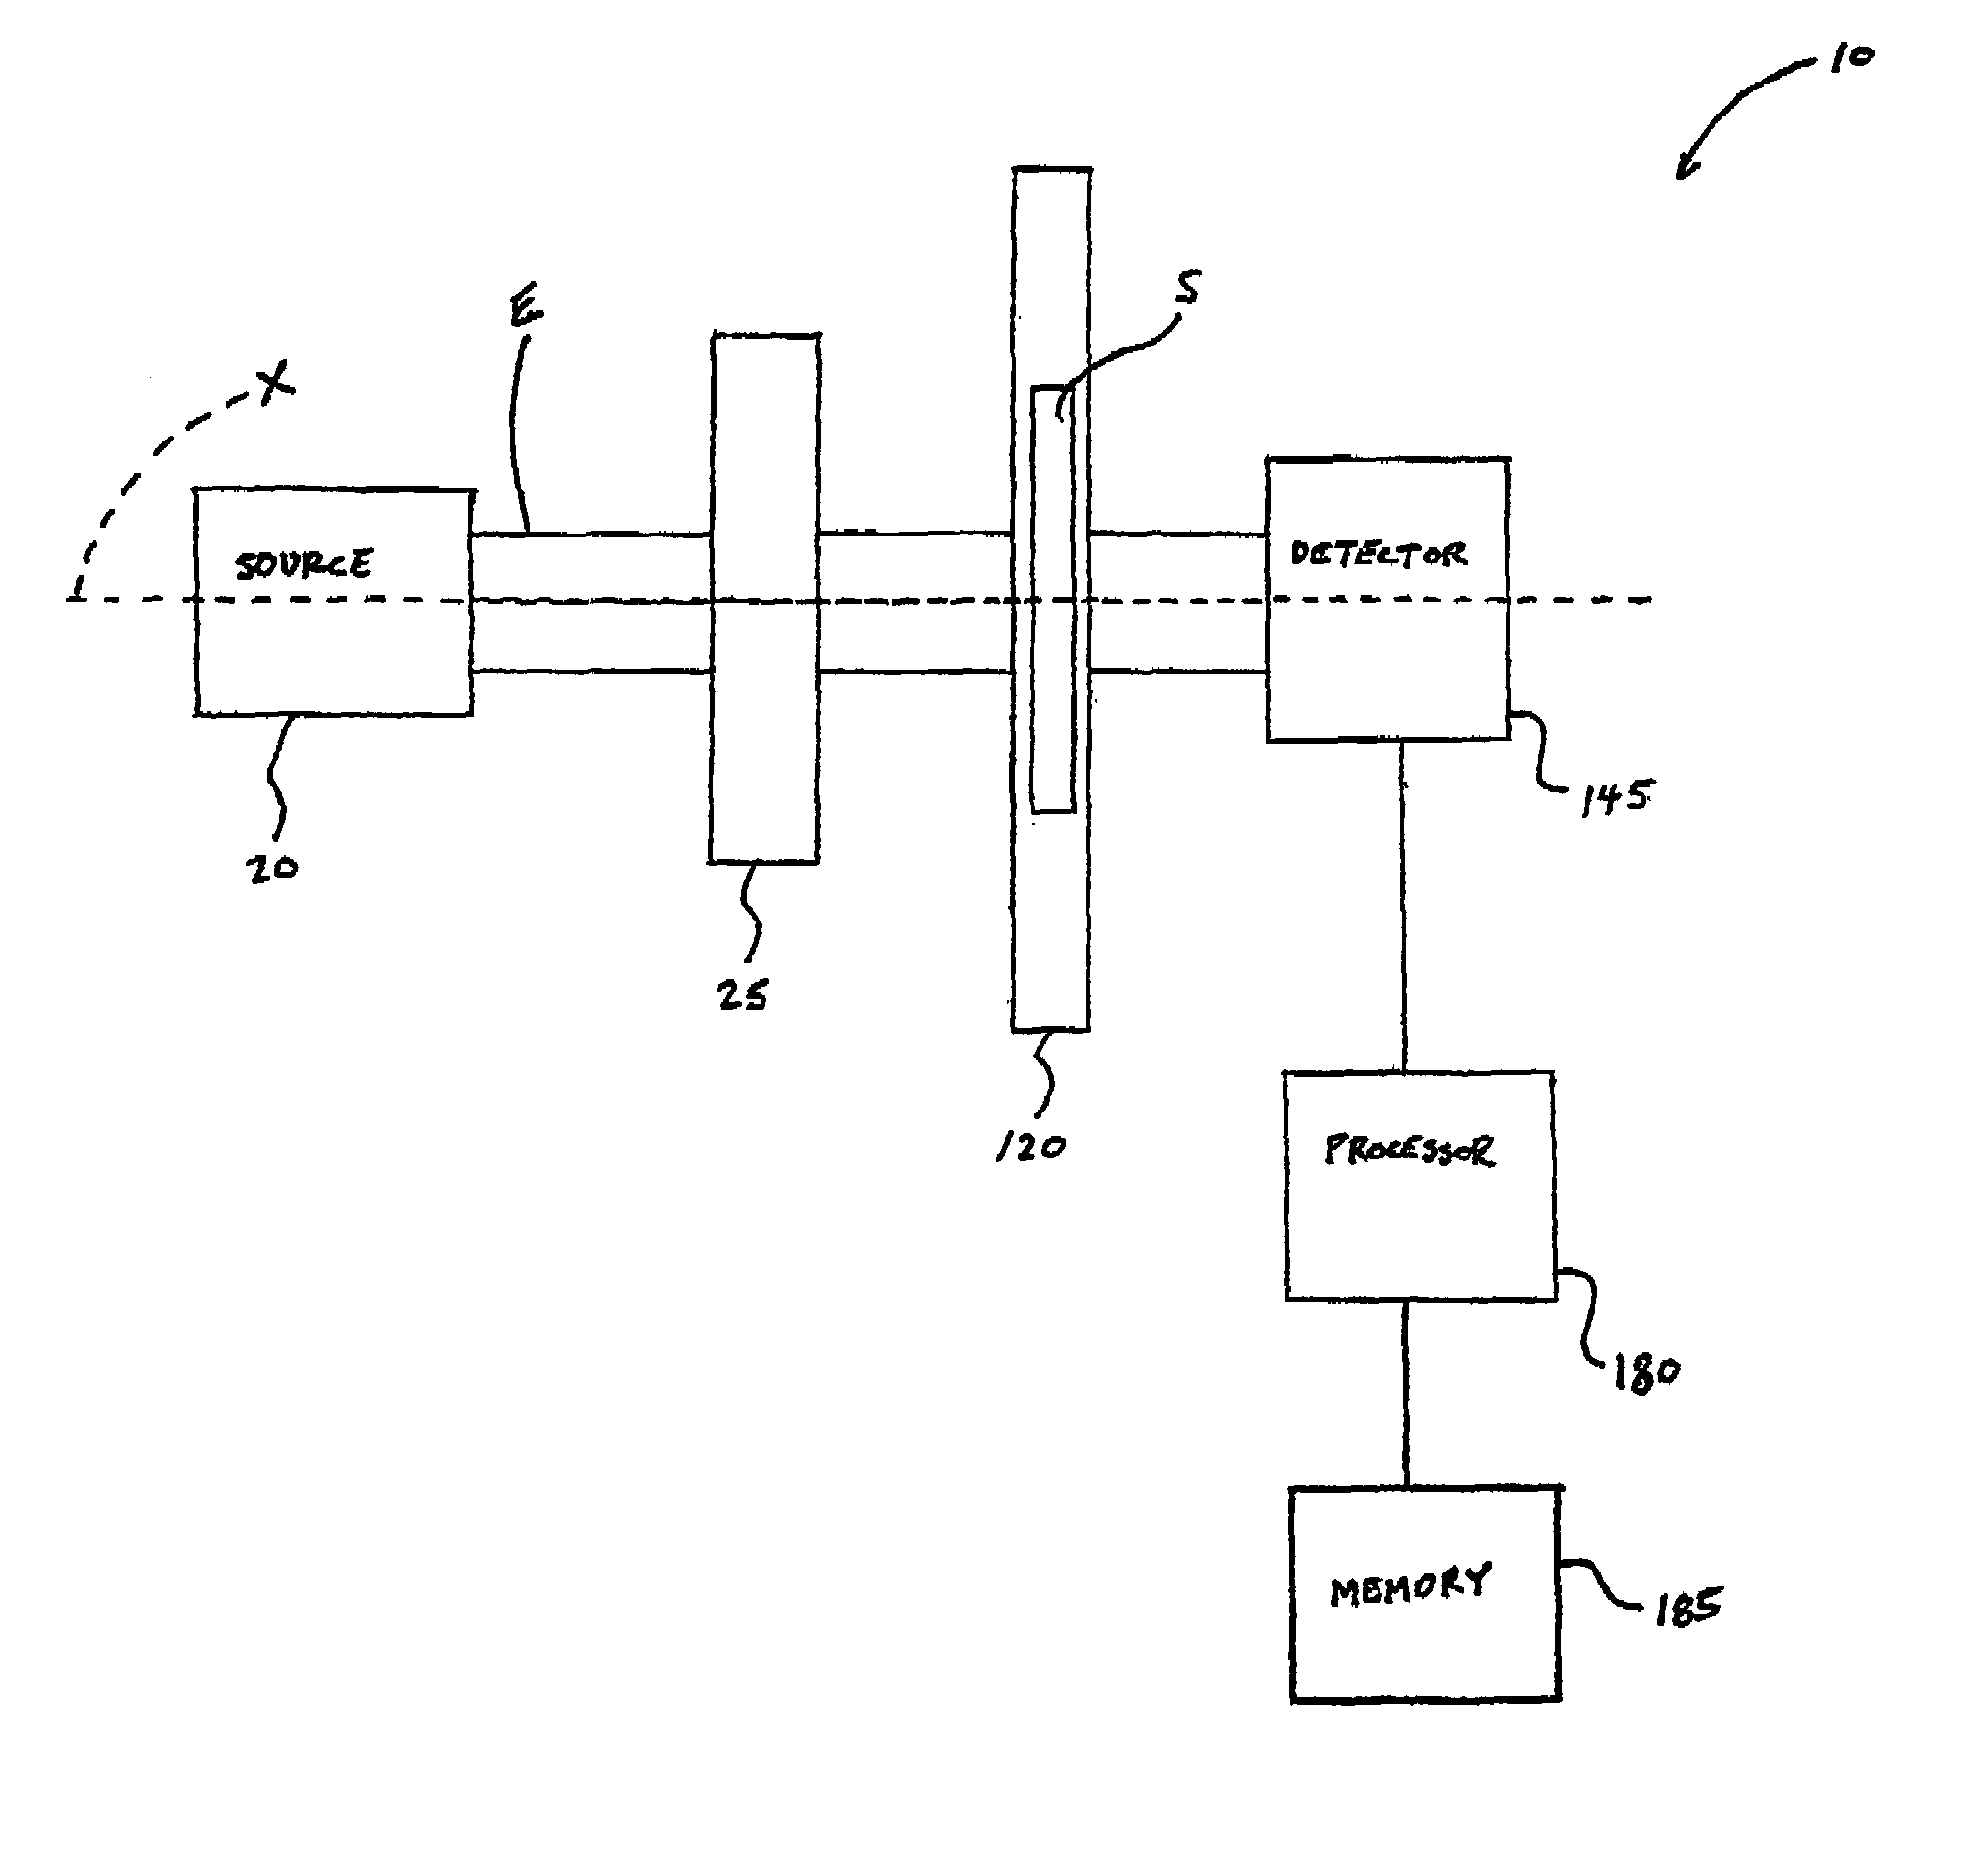 Method of determining analyte concentration in a sample using infrared transmission data